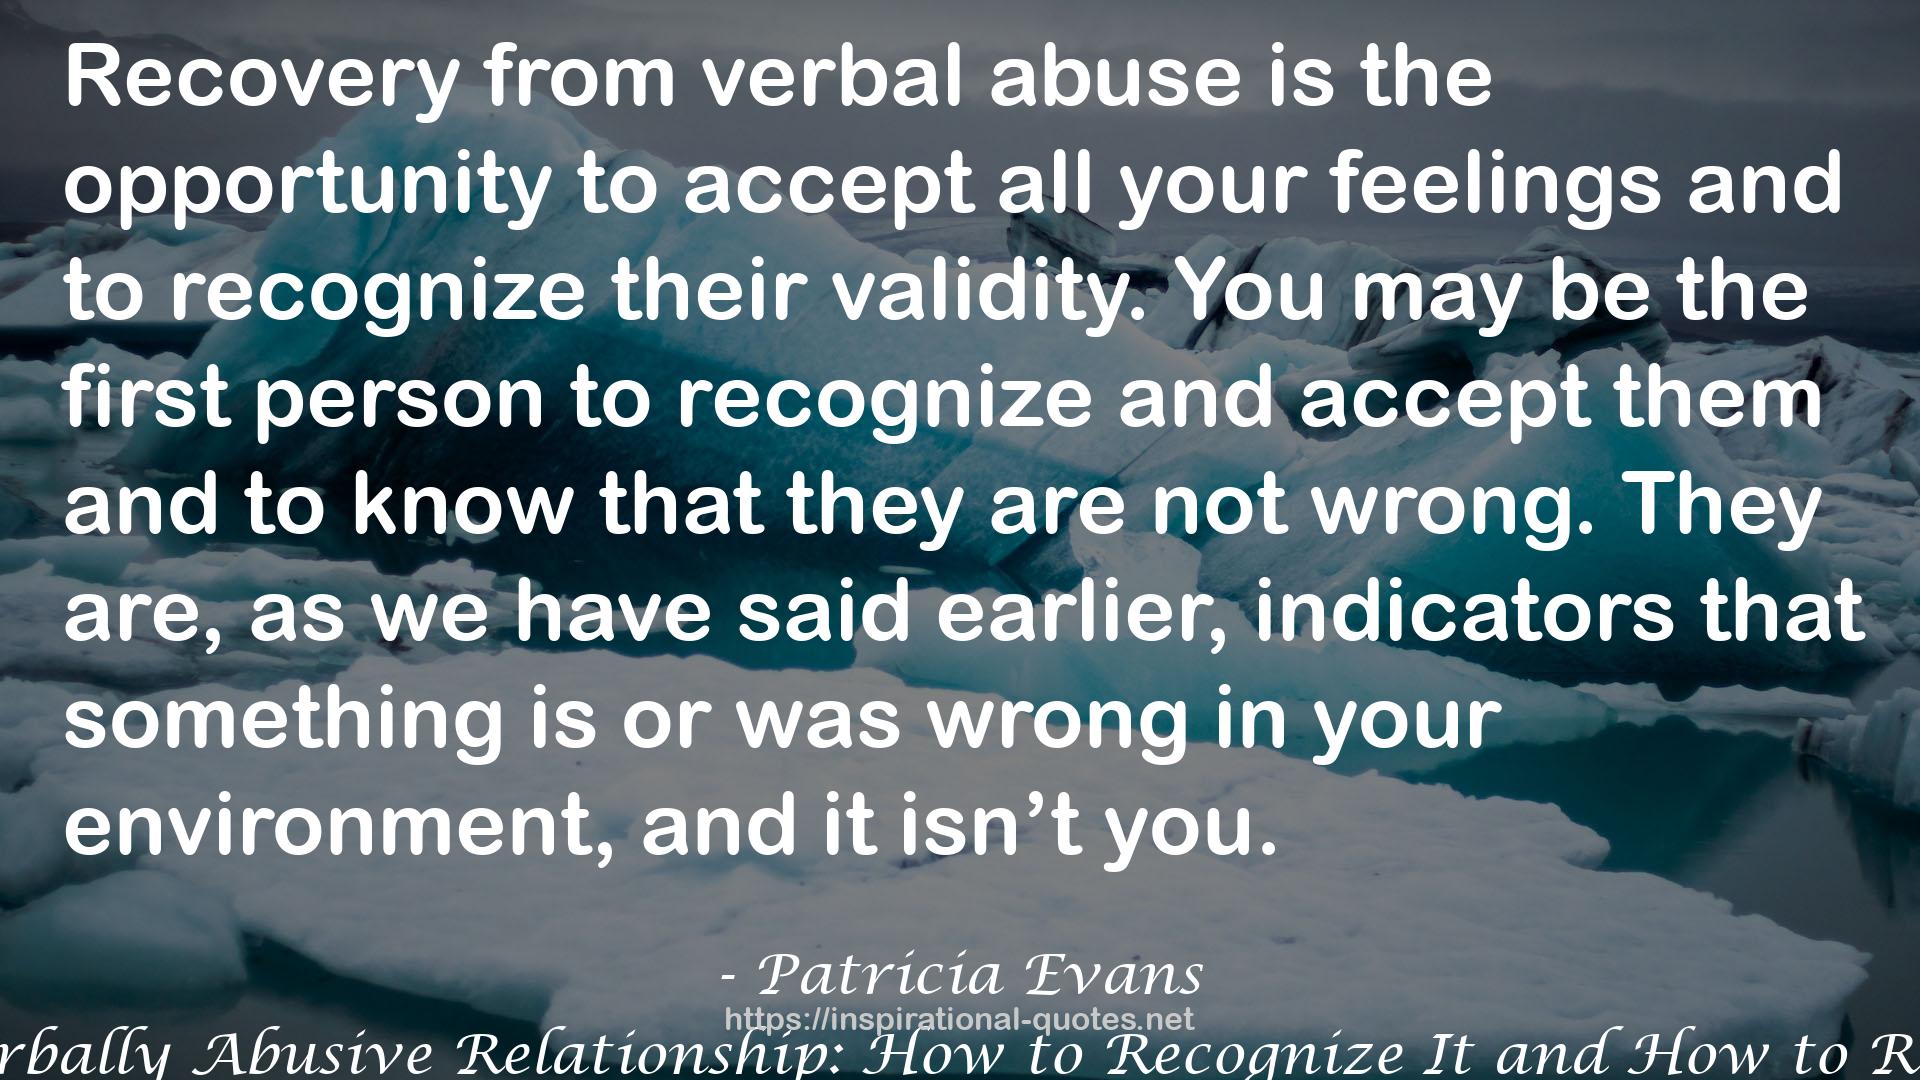 The Verbally Abusive Relationship: How to Recognize It and How to Respond QUOTES